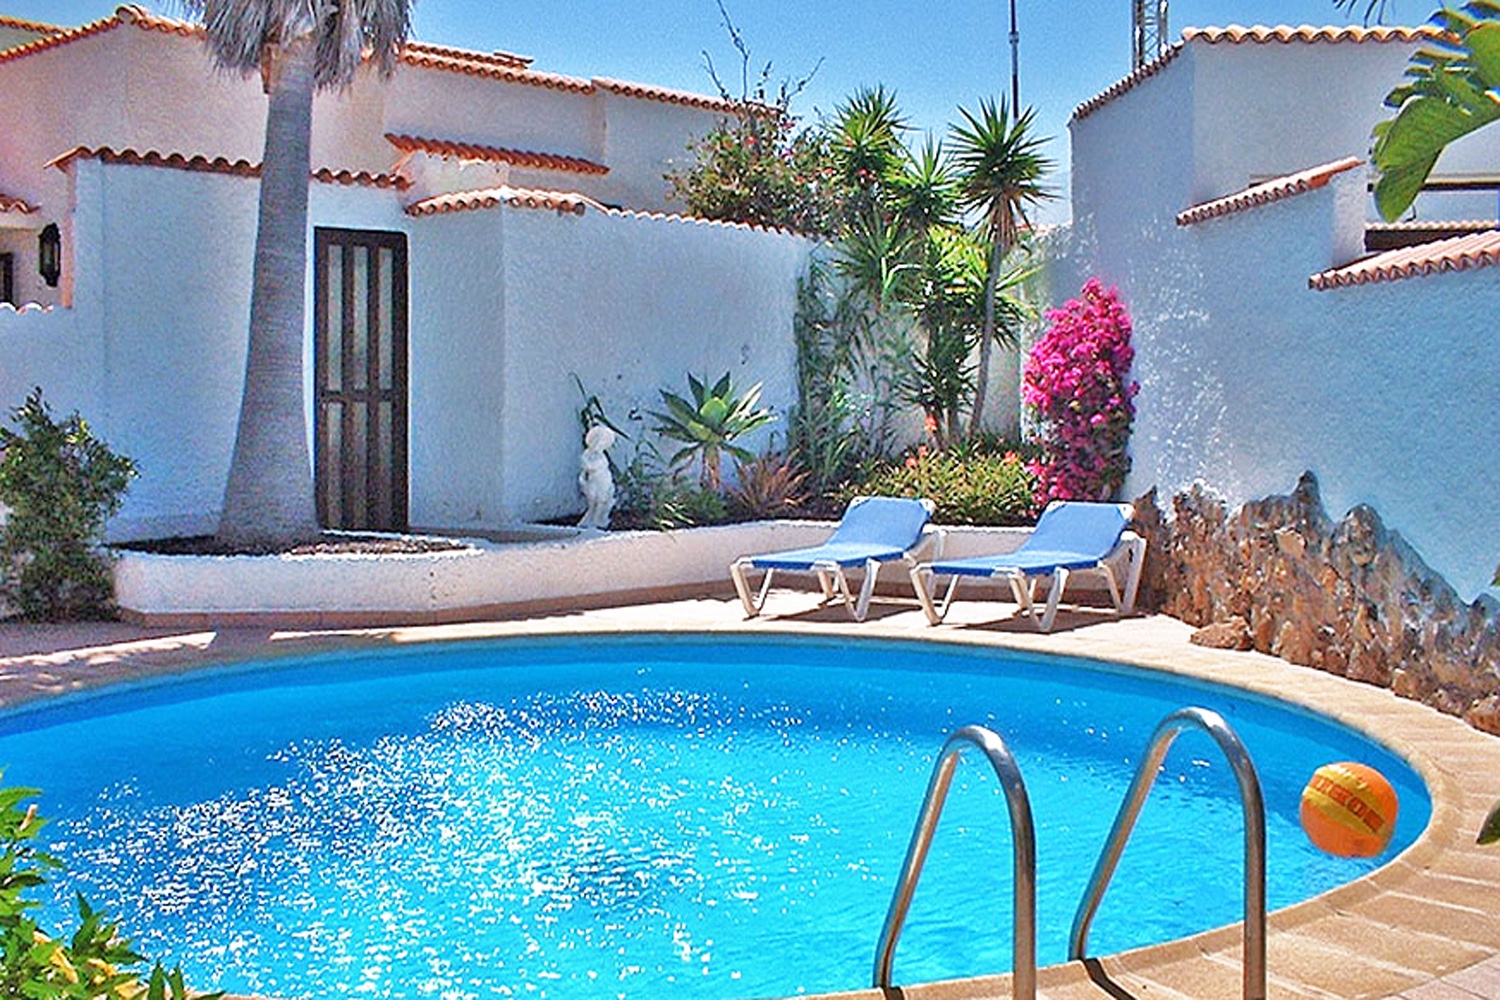 Holiday house to rent with private pool near the beach of Porís de Abona in the south of Tenerife.